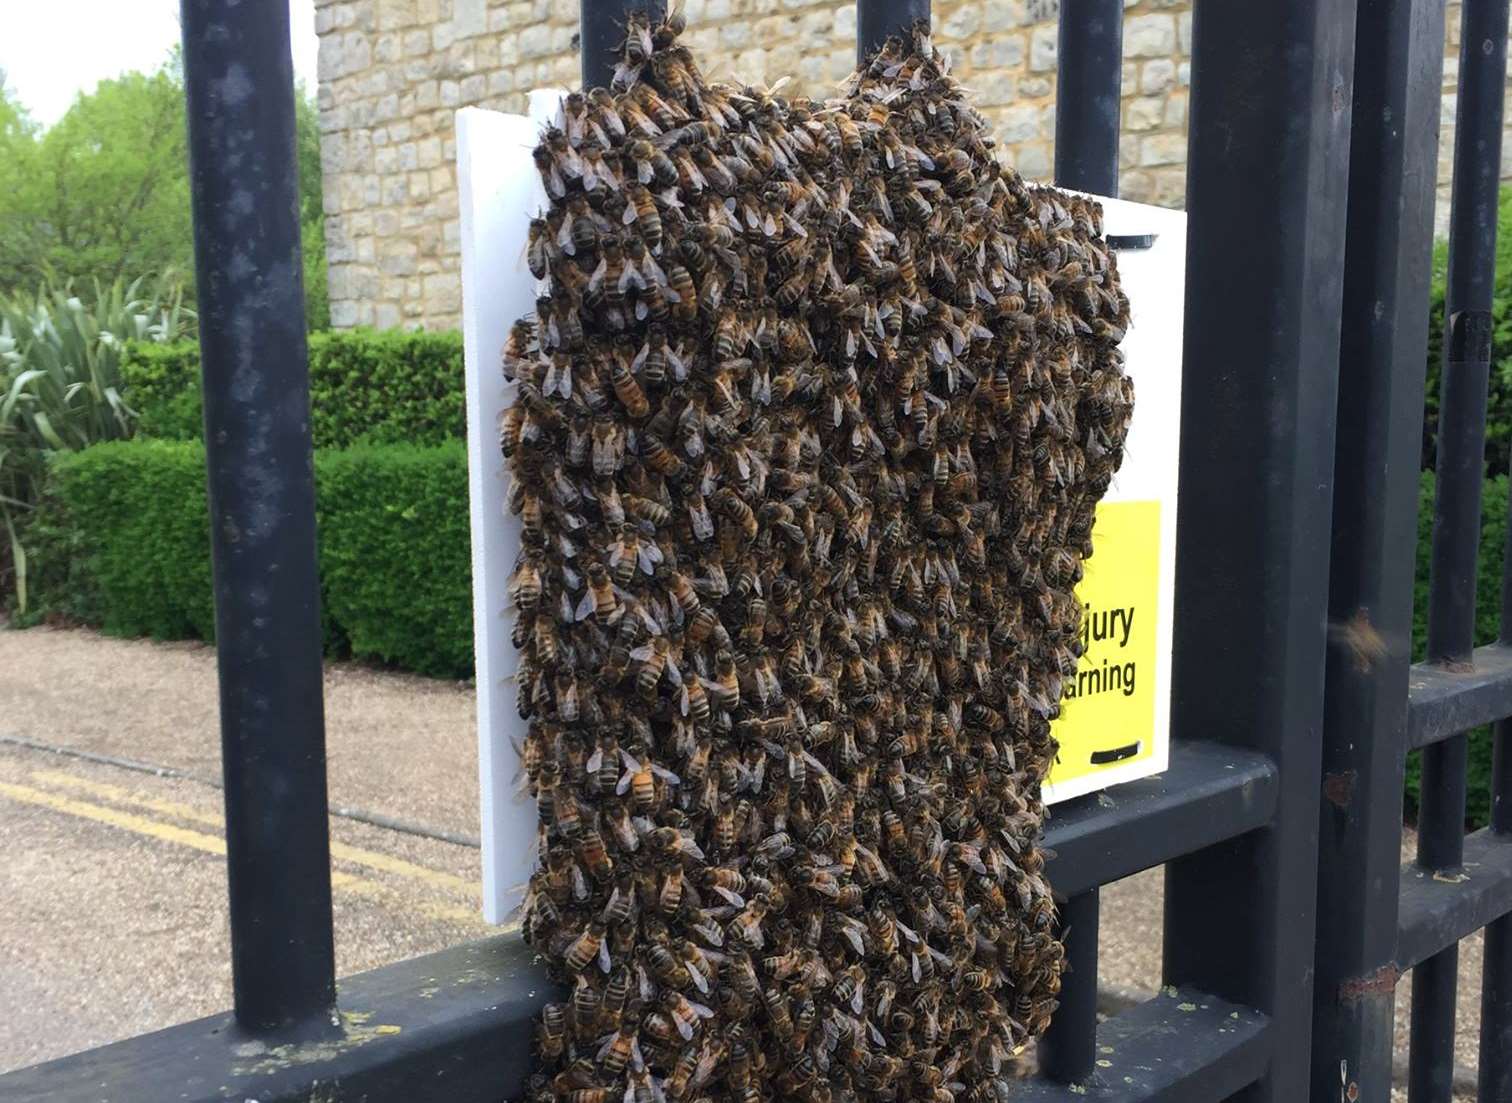 The swarm of bees was spotted in Barming. Pic courtesy of Ashford Pest Control